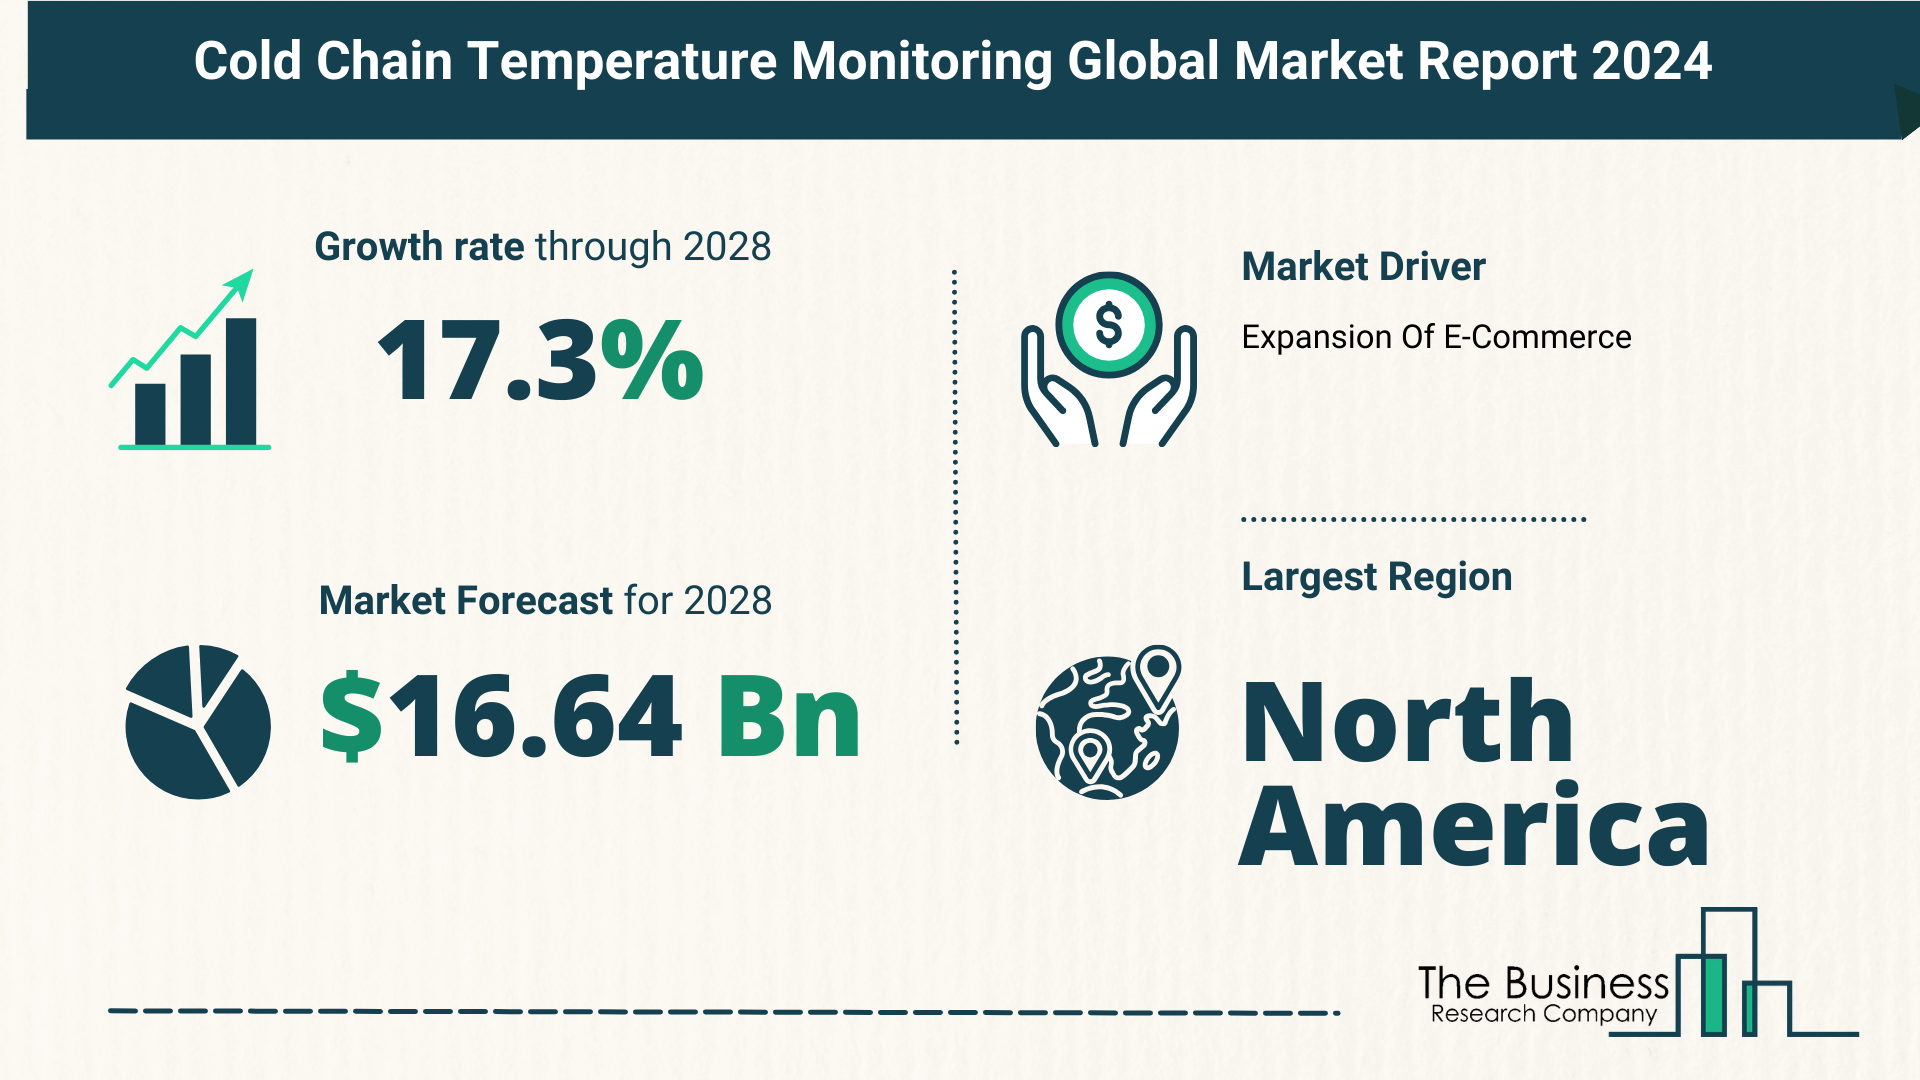 Top 5 Insights From The Cold Chain Temperature Monitoring Market Report 2024